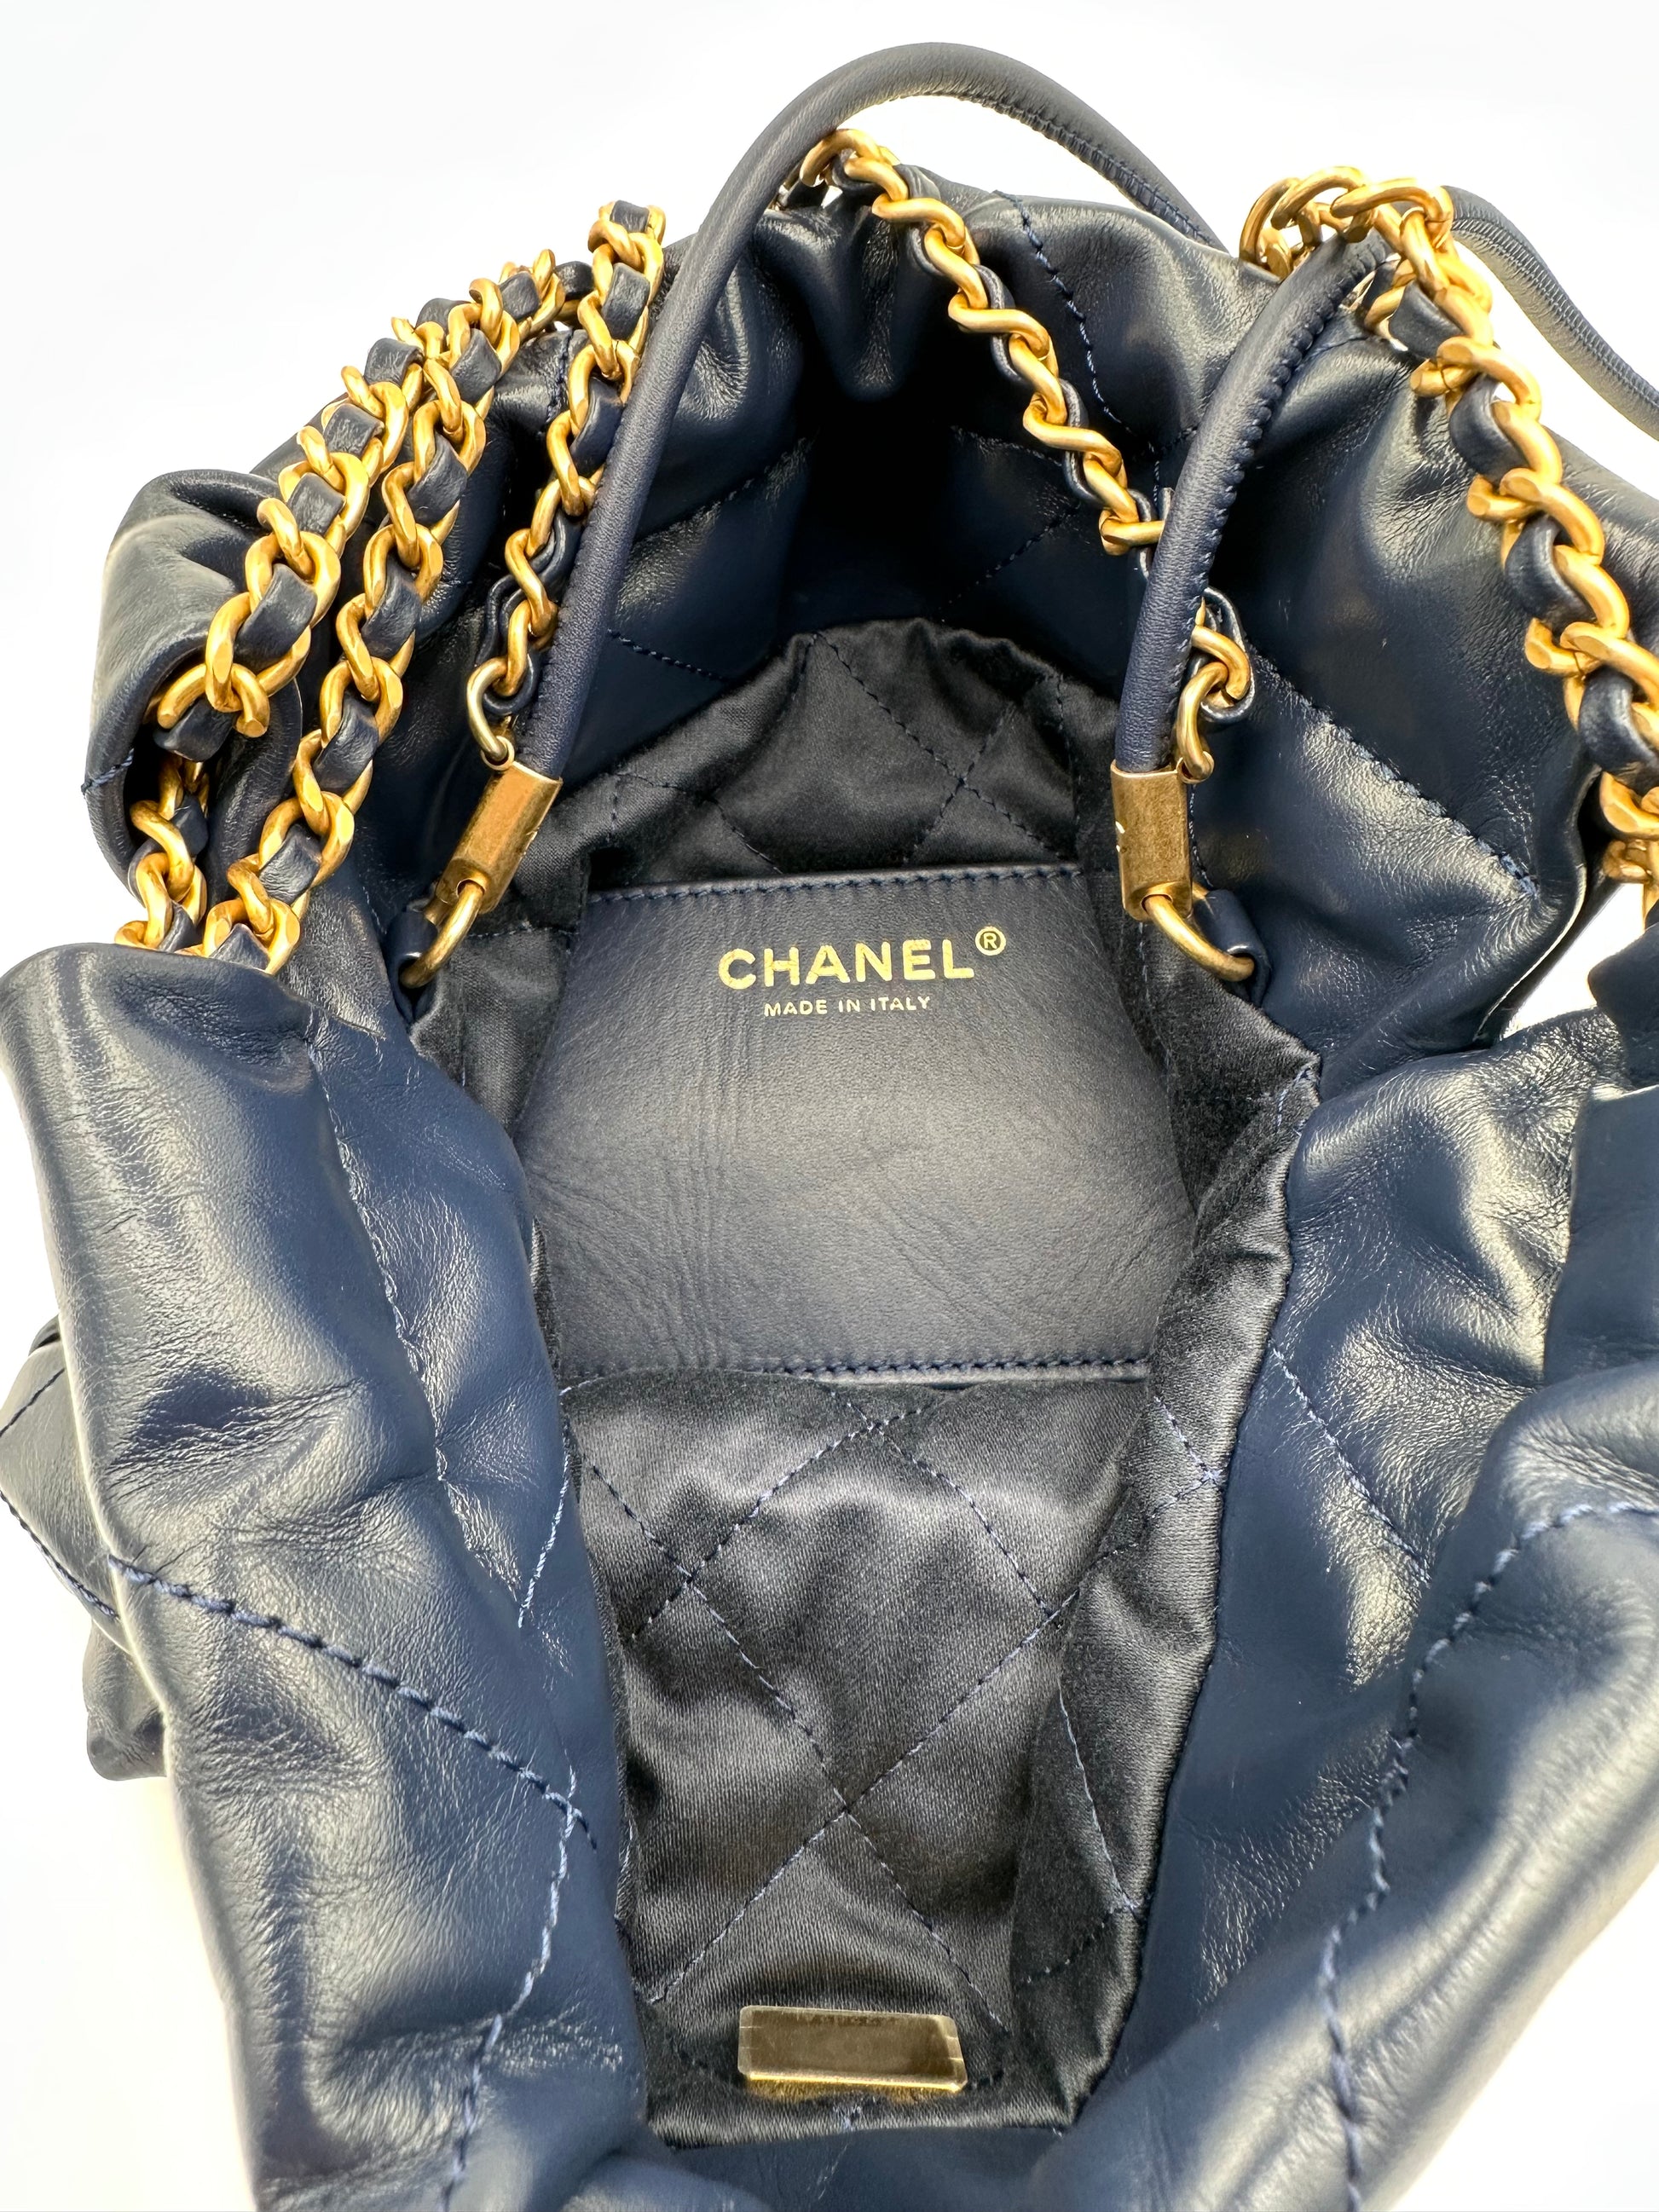 The Ultimate Chanel 22 Bag Review - Is This The New It-Bag? - CLOSS FASHION